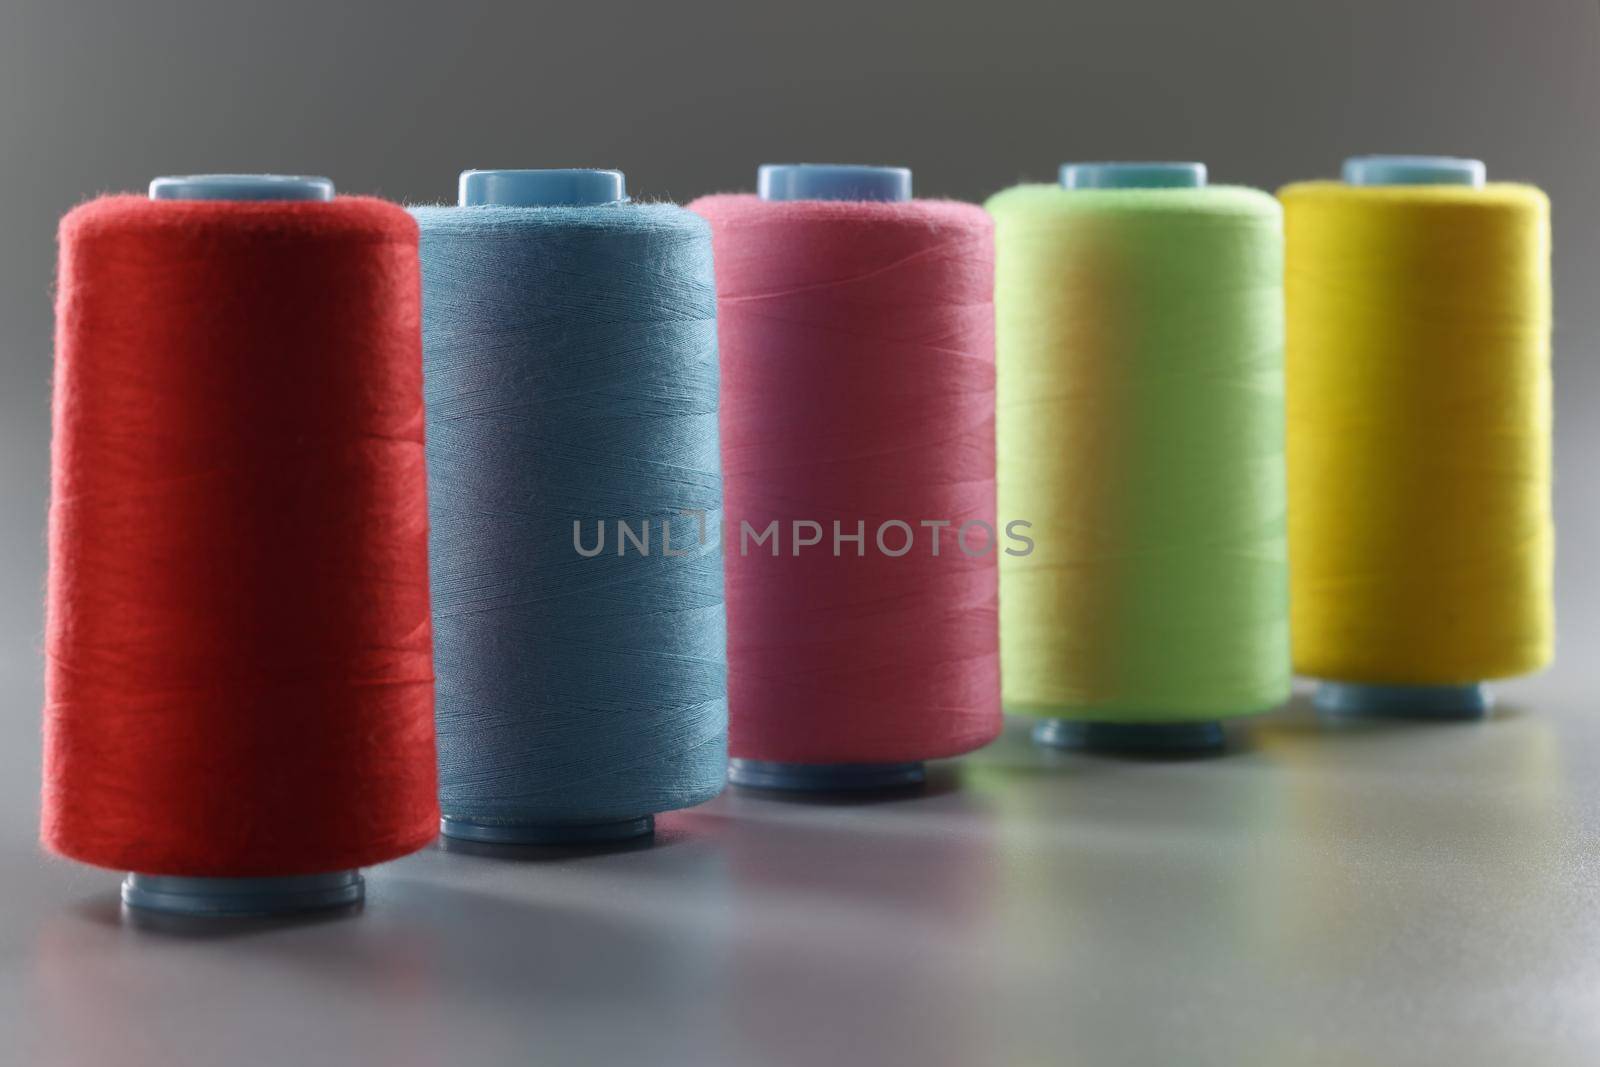 Group of whole haberdashery item colorful thread spools on grey surface by kuprevich